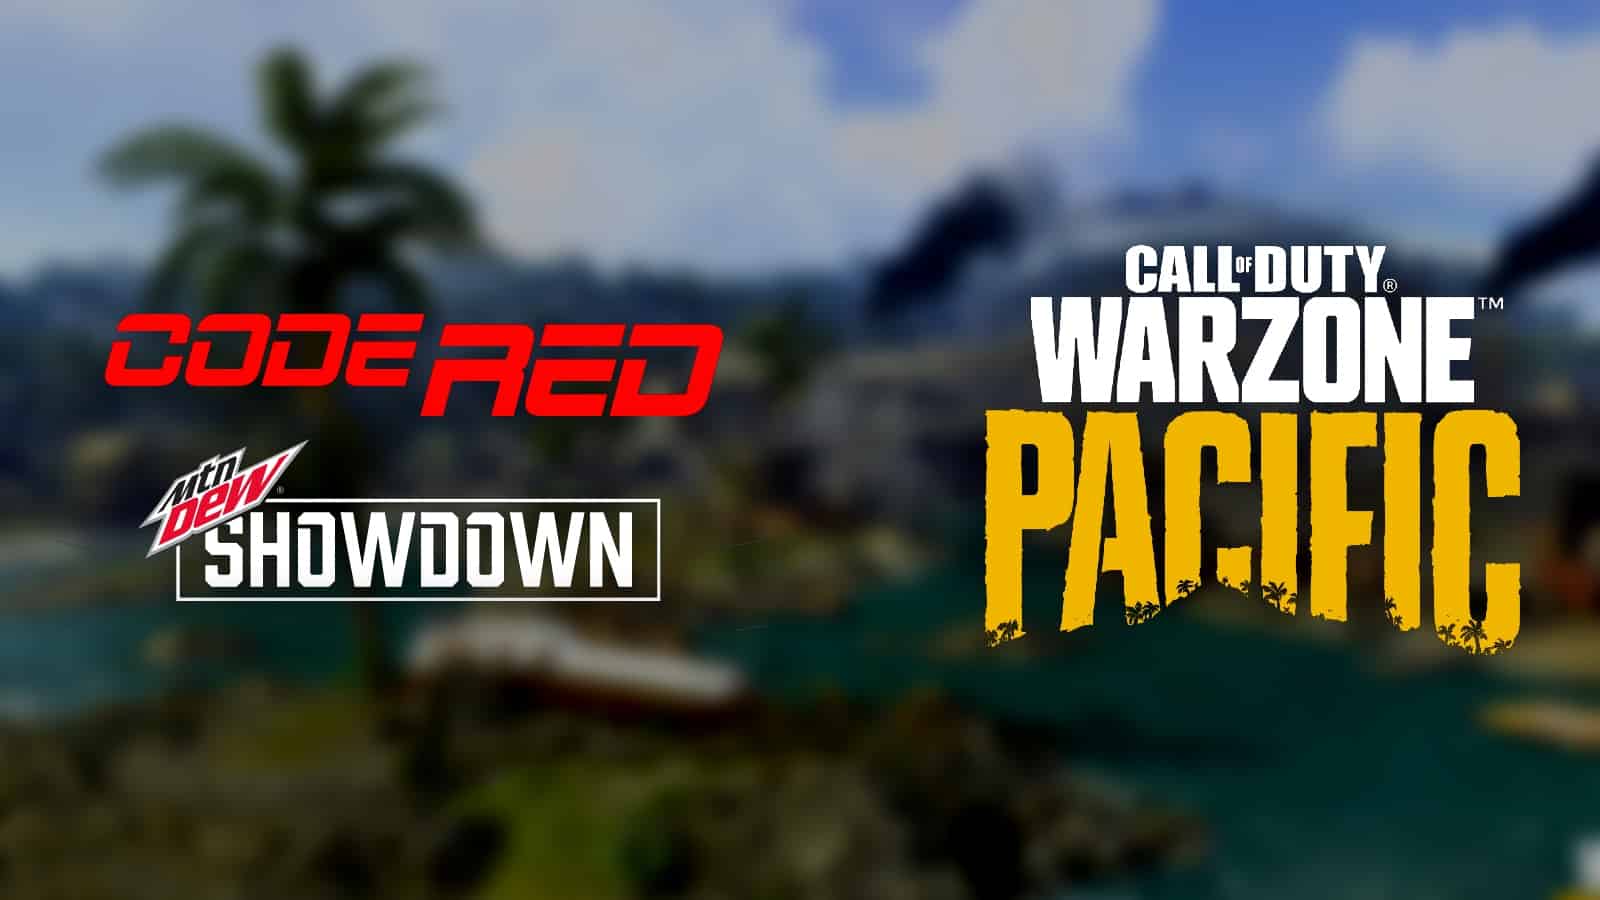 warzone pacific code red showdown with blurred caldera background